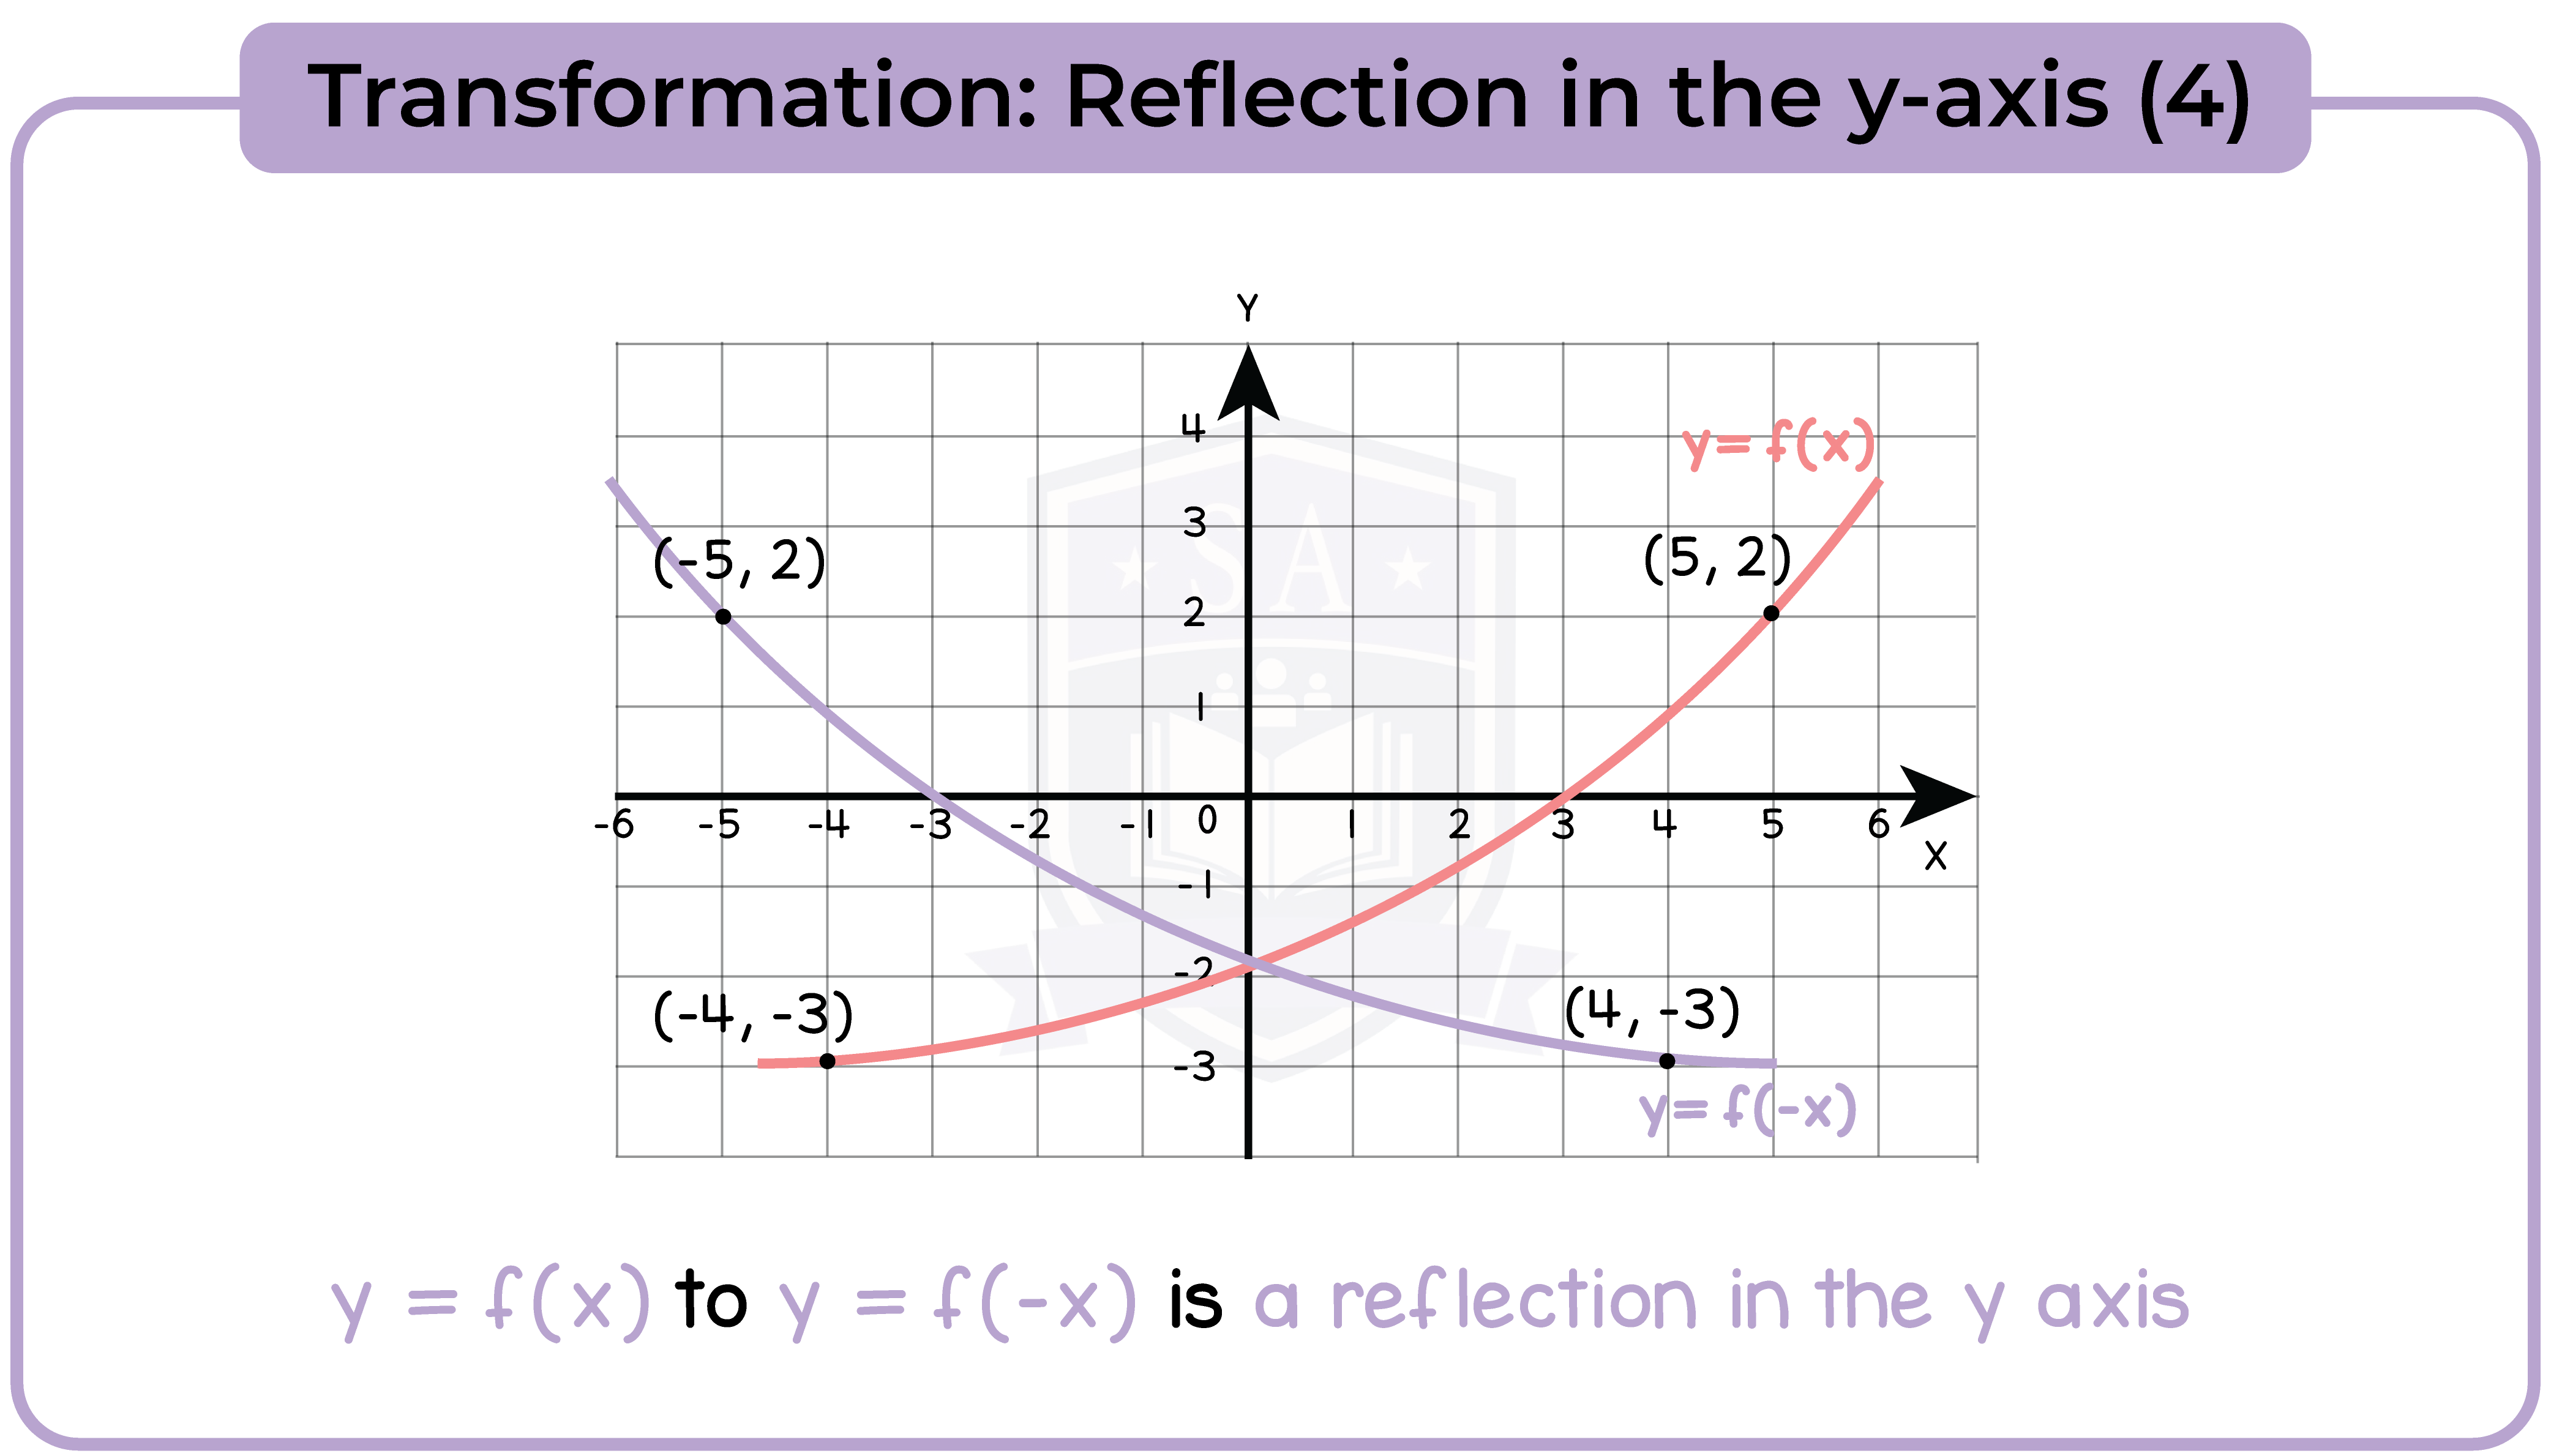 edexcel_igcse_mathematics a_topic 23_graphs_012_Transformation: Reflection in the y-axis (4)